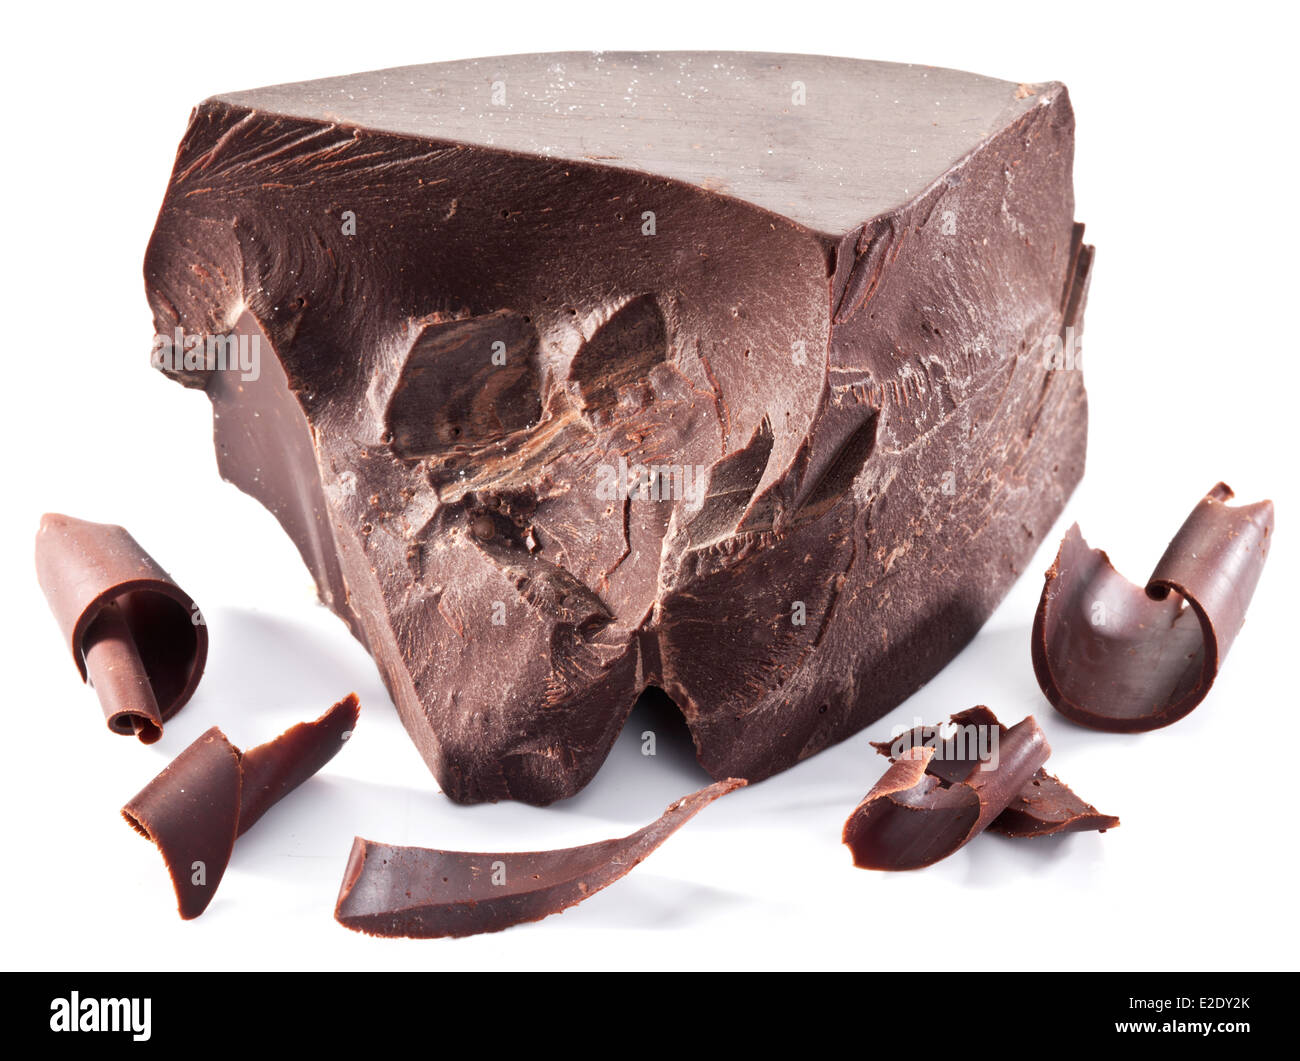 Chocolate block and chips near it isolated on a white background. Stock Photo